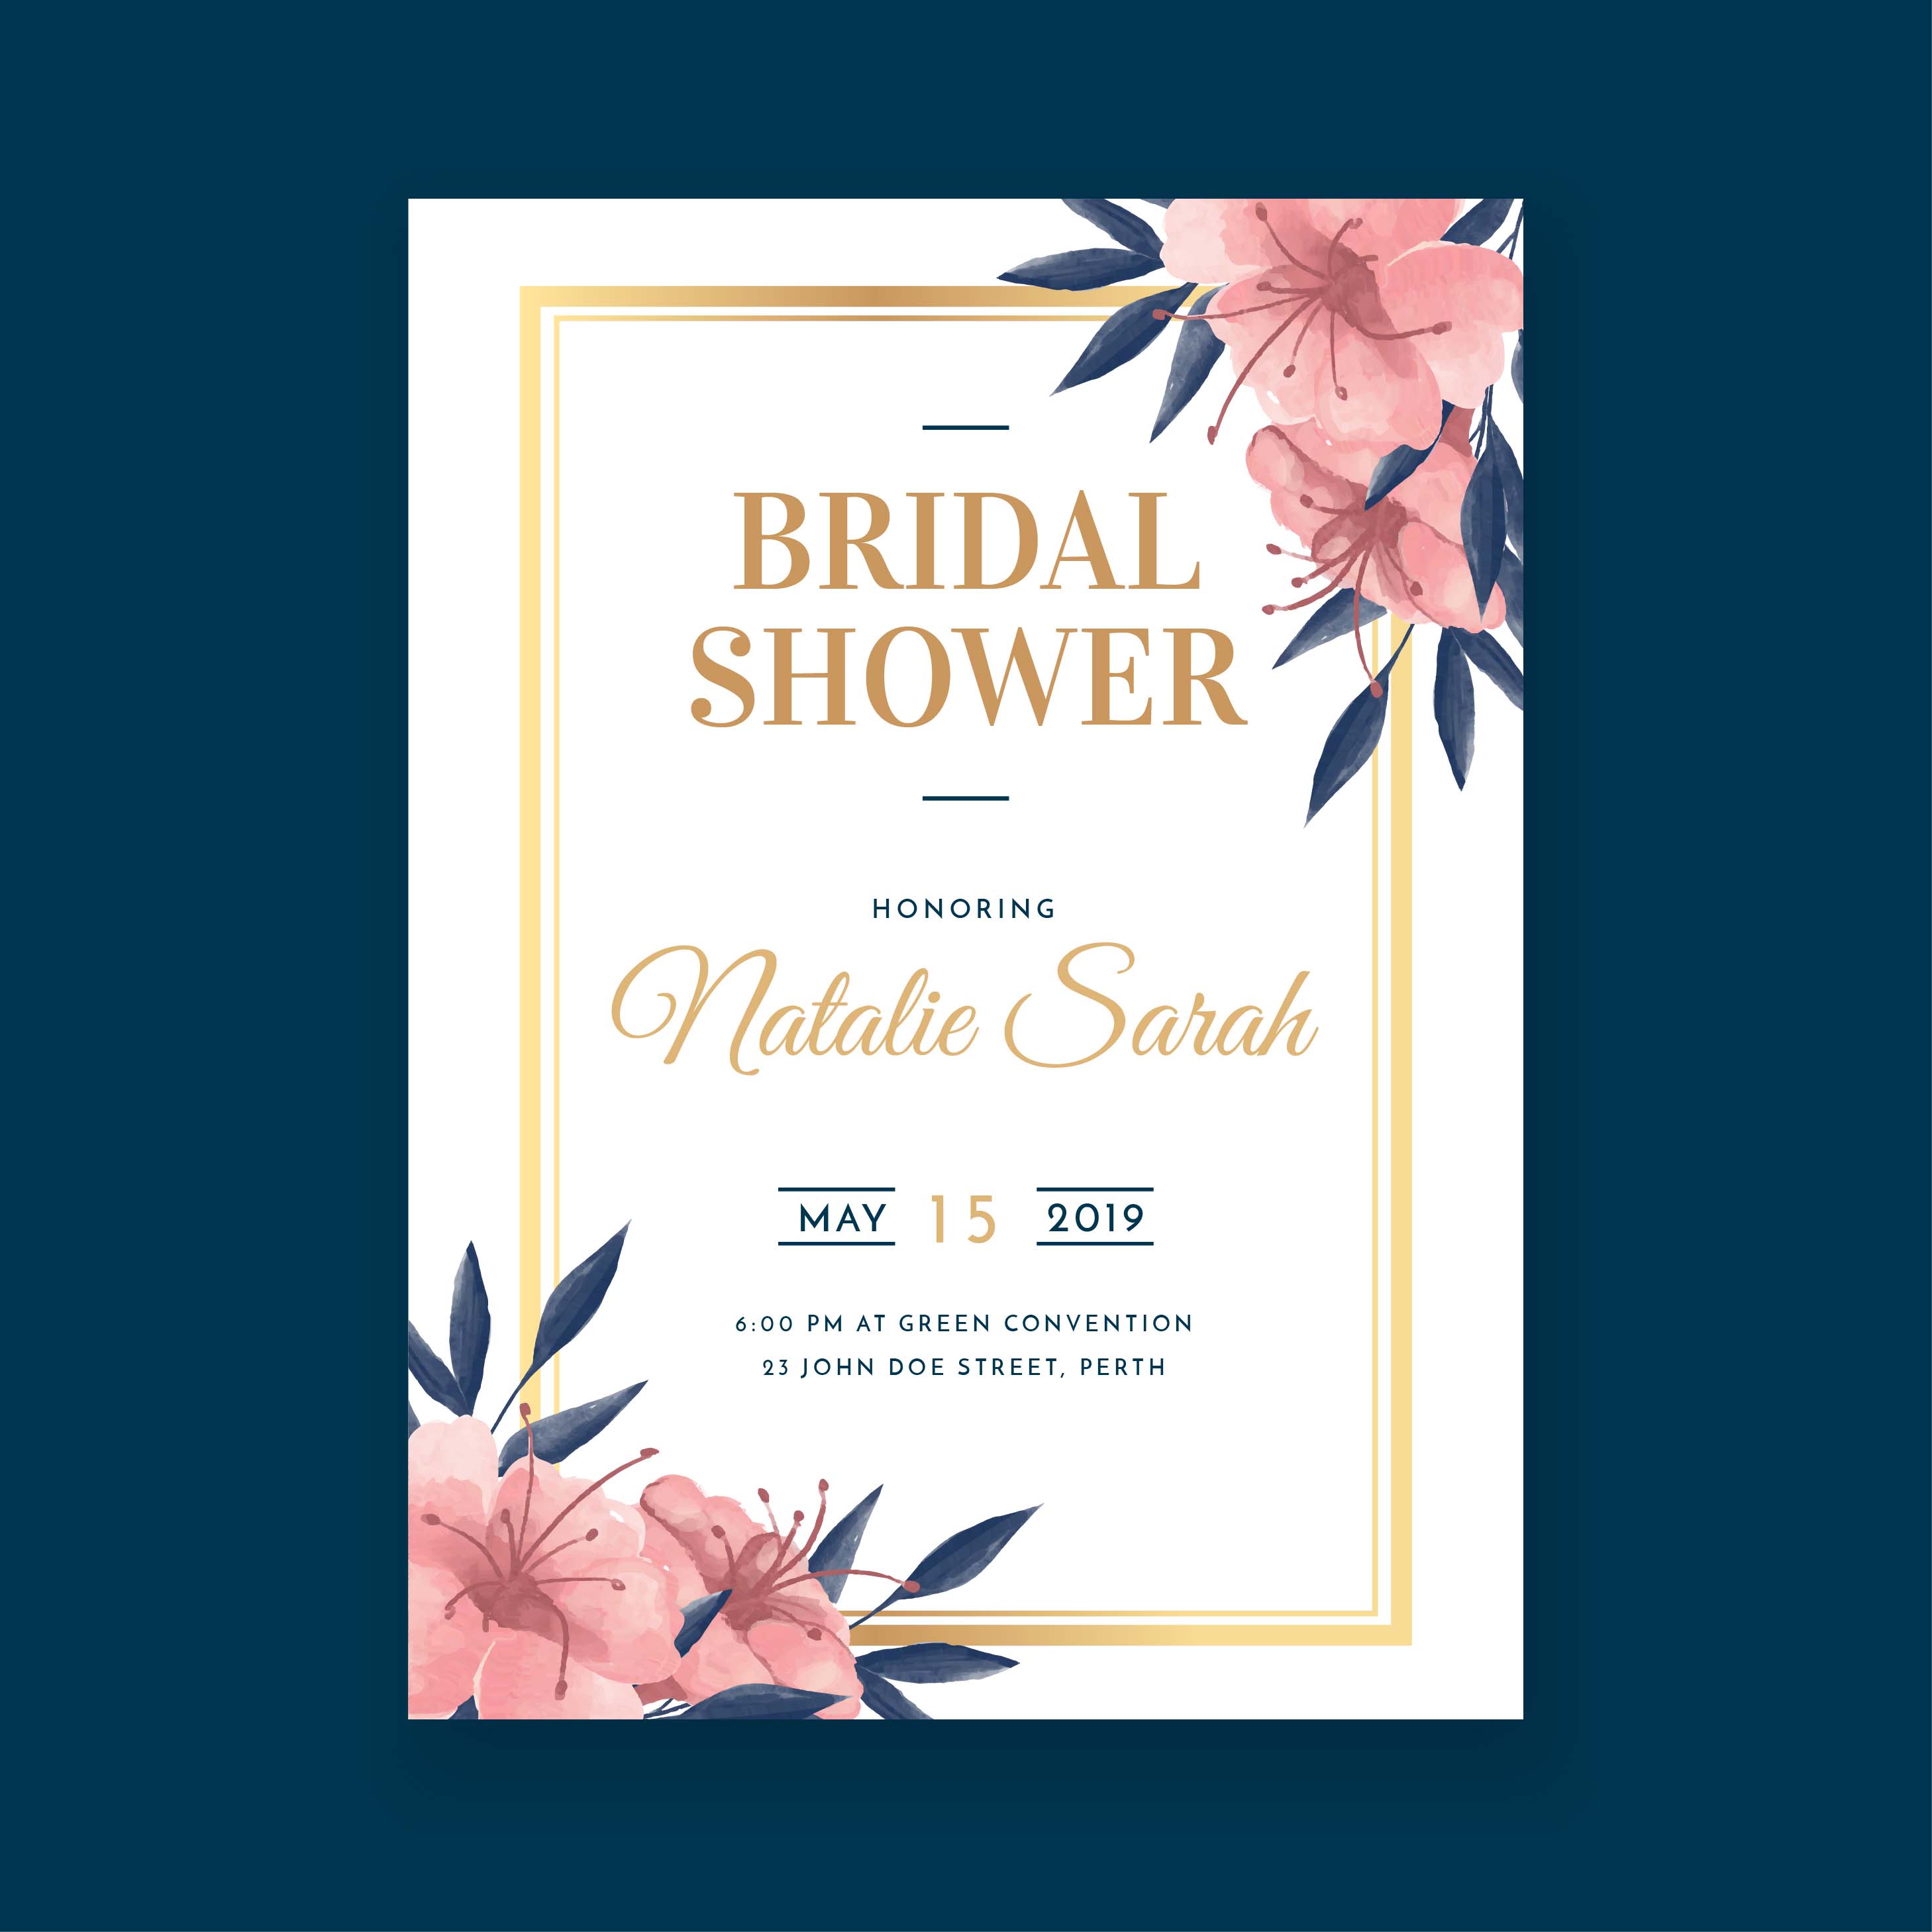 Free Bridal Shower Banner Template